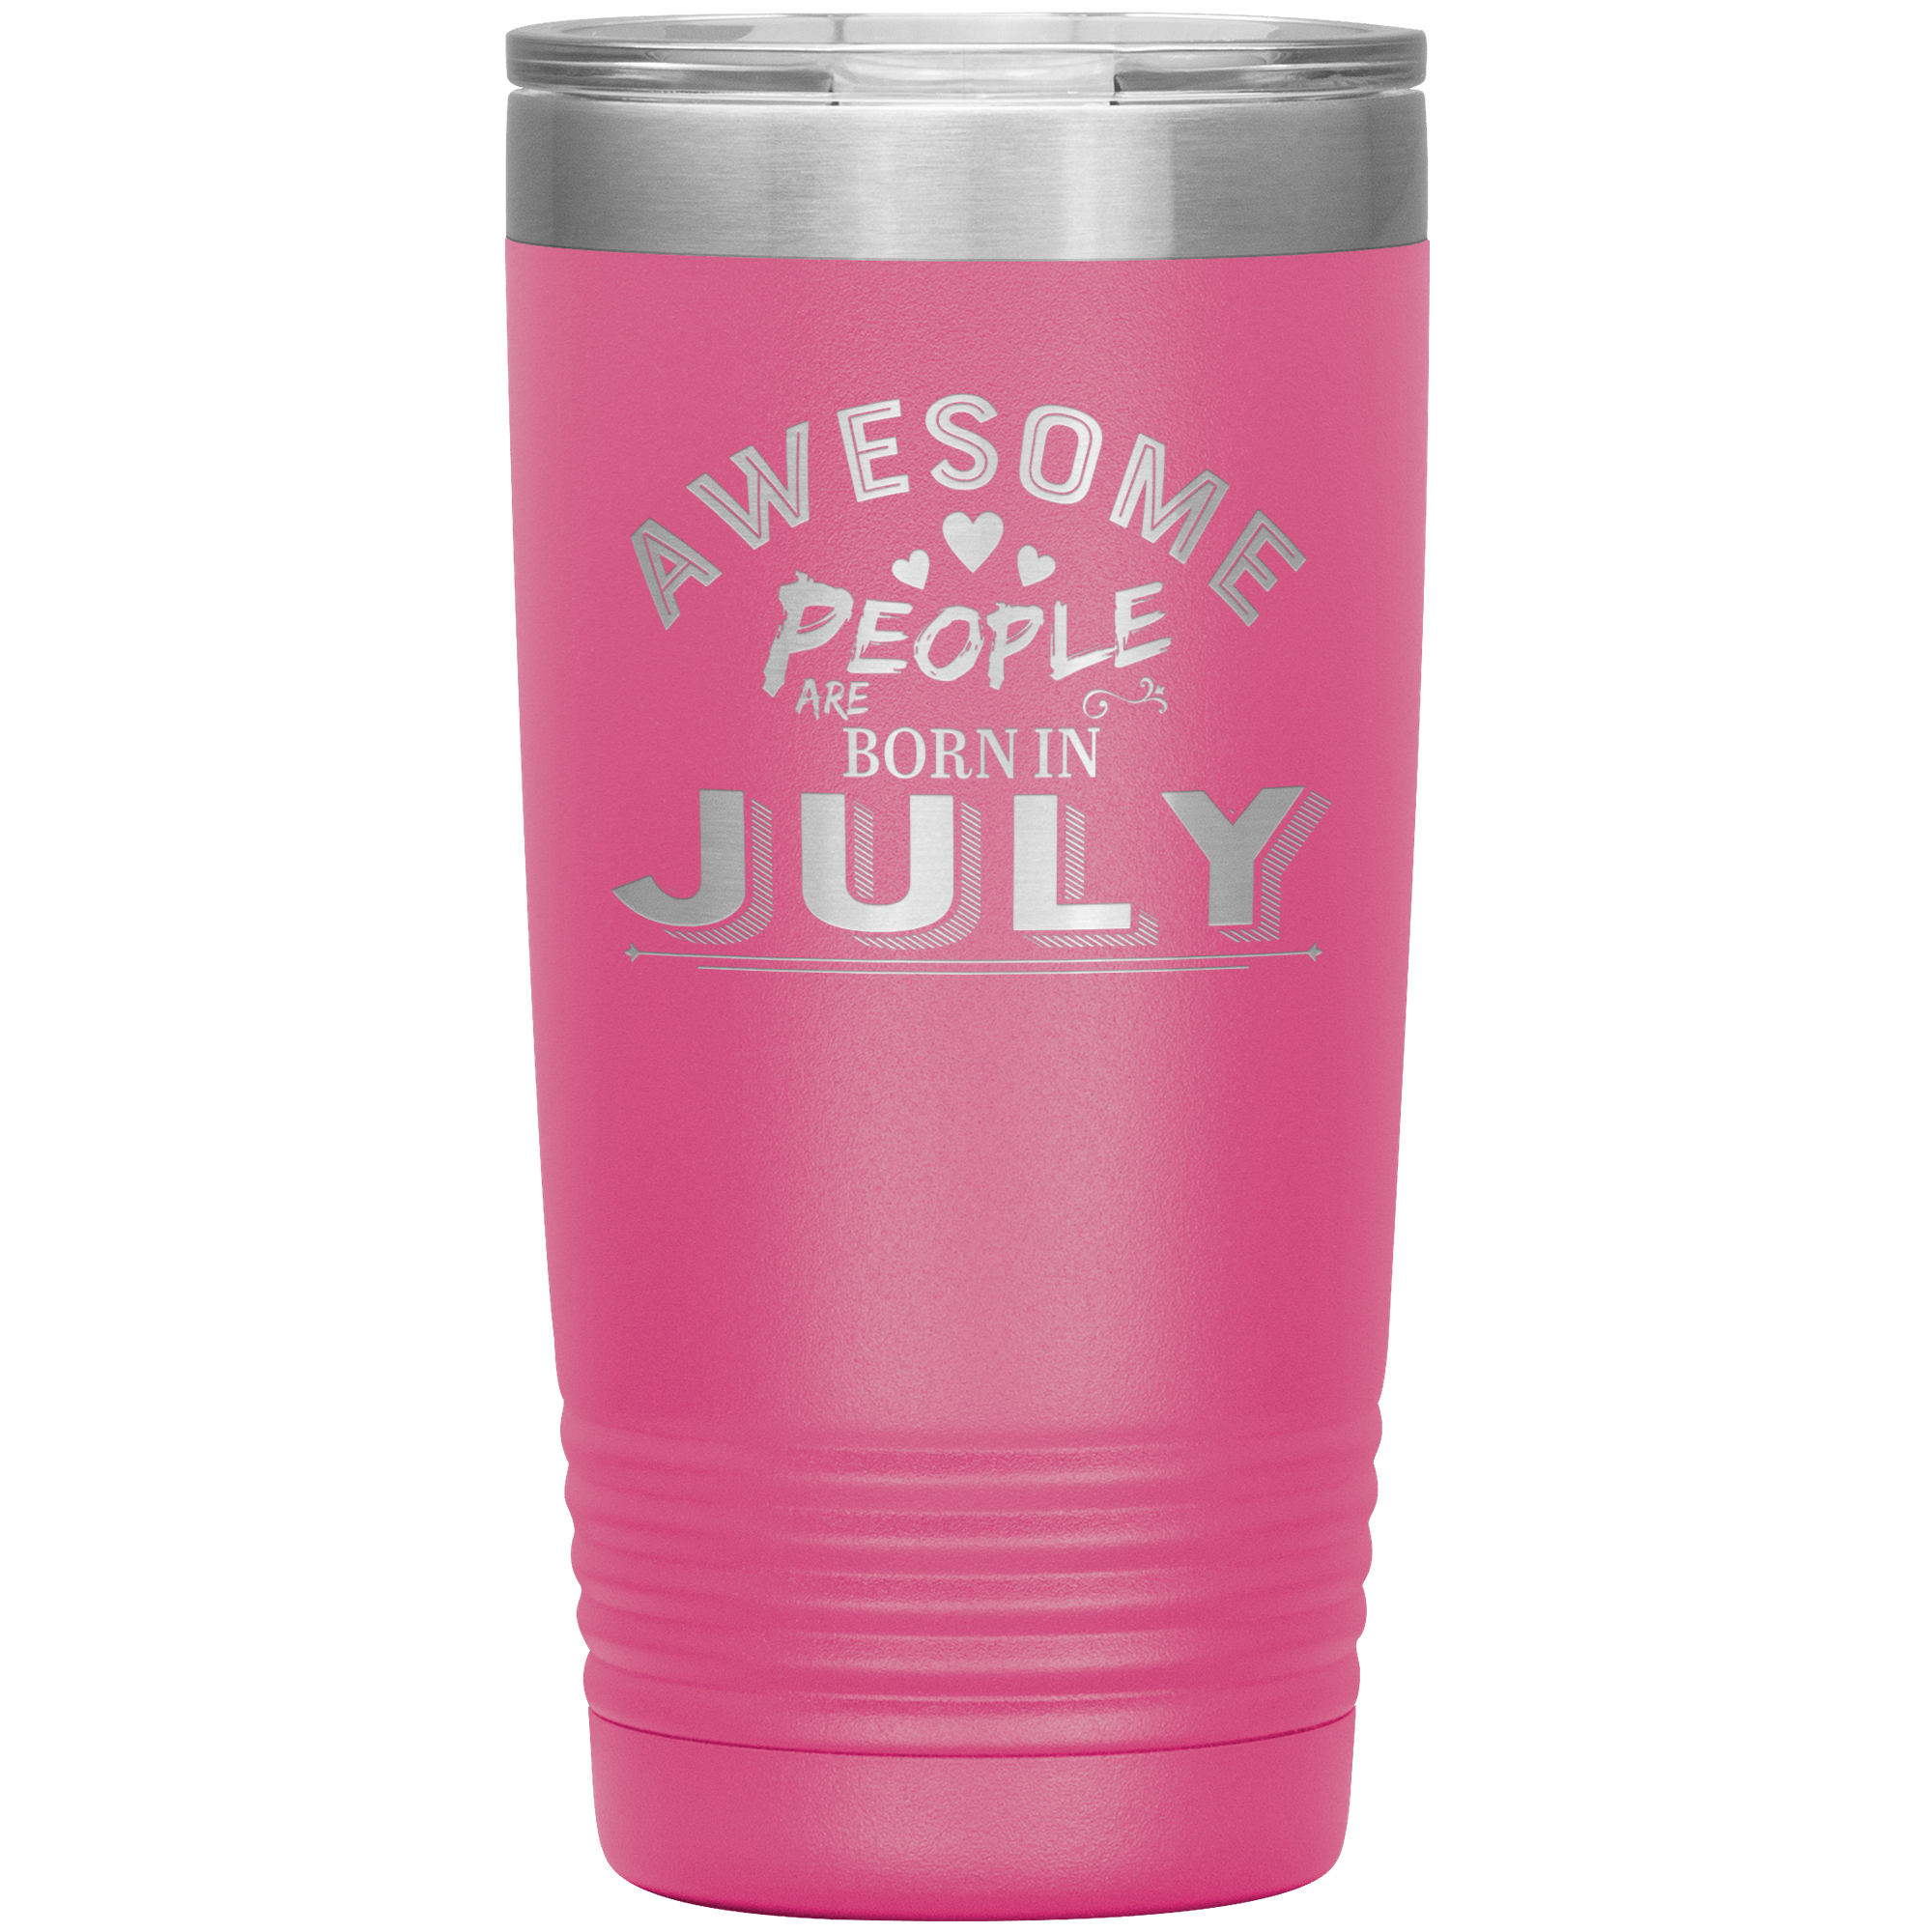 "AWESOME PEOPLE ARE BORN IN JULY" Tumbler